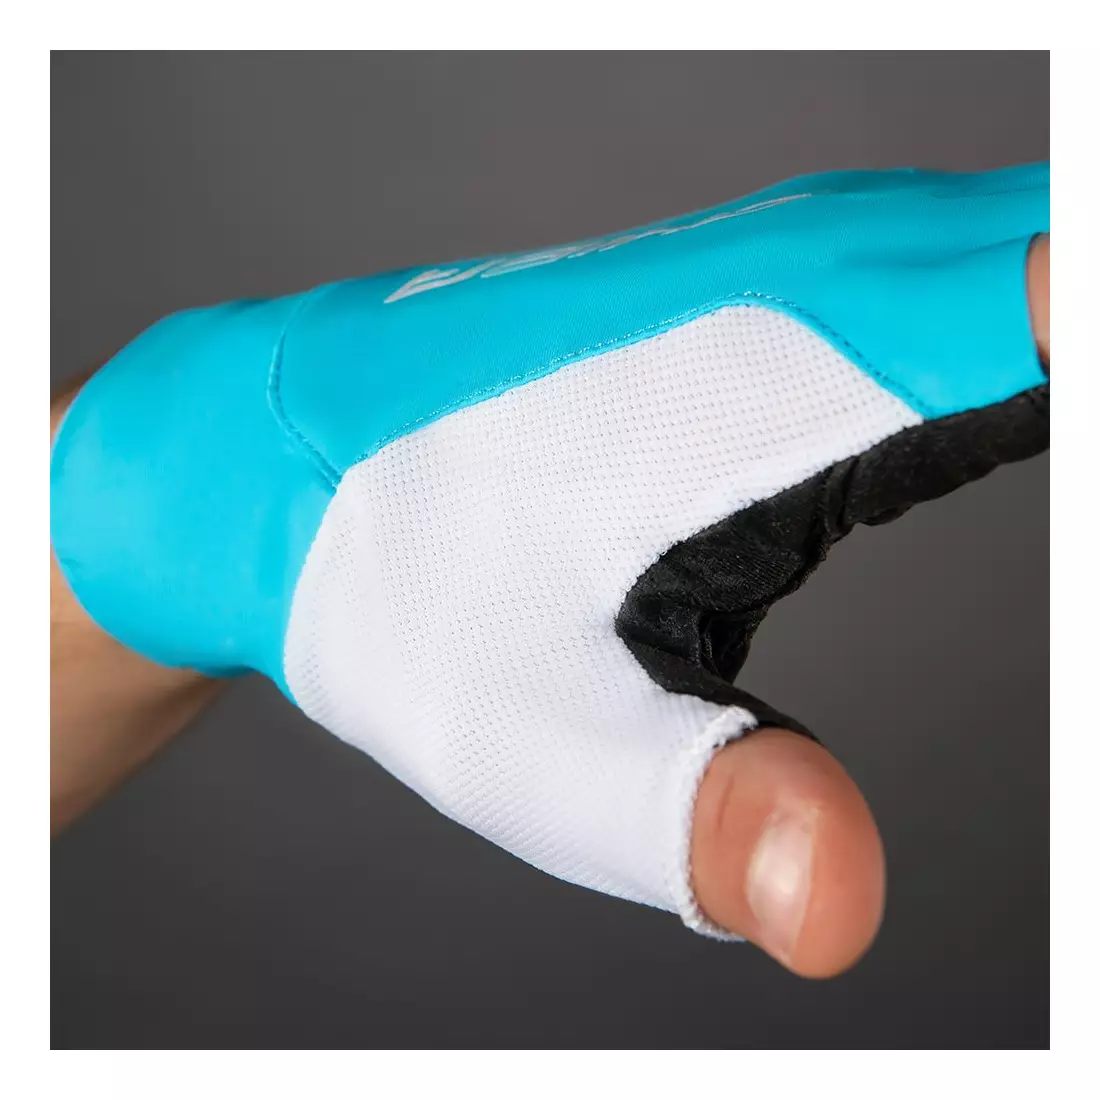 CHIBA MISTRAL road cycling gloves, turquoise 3030420